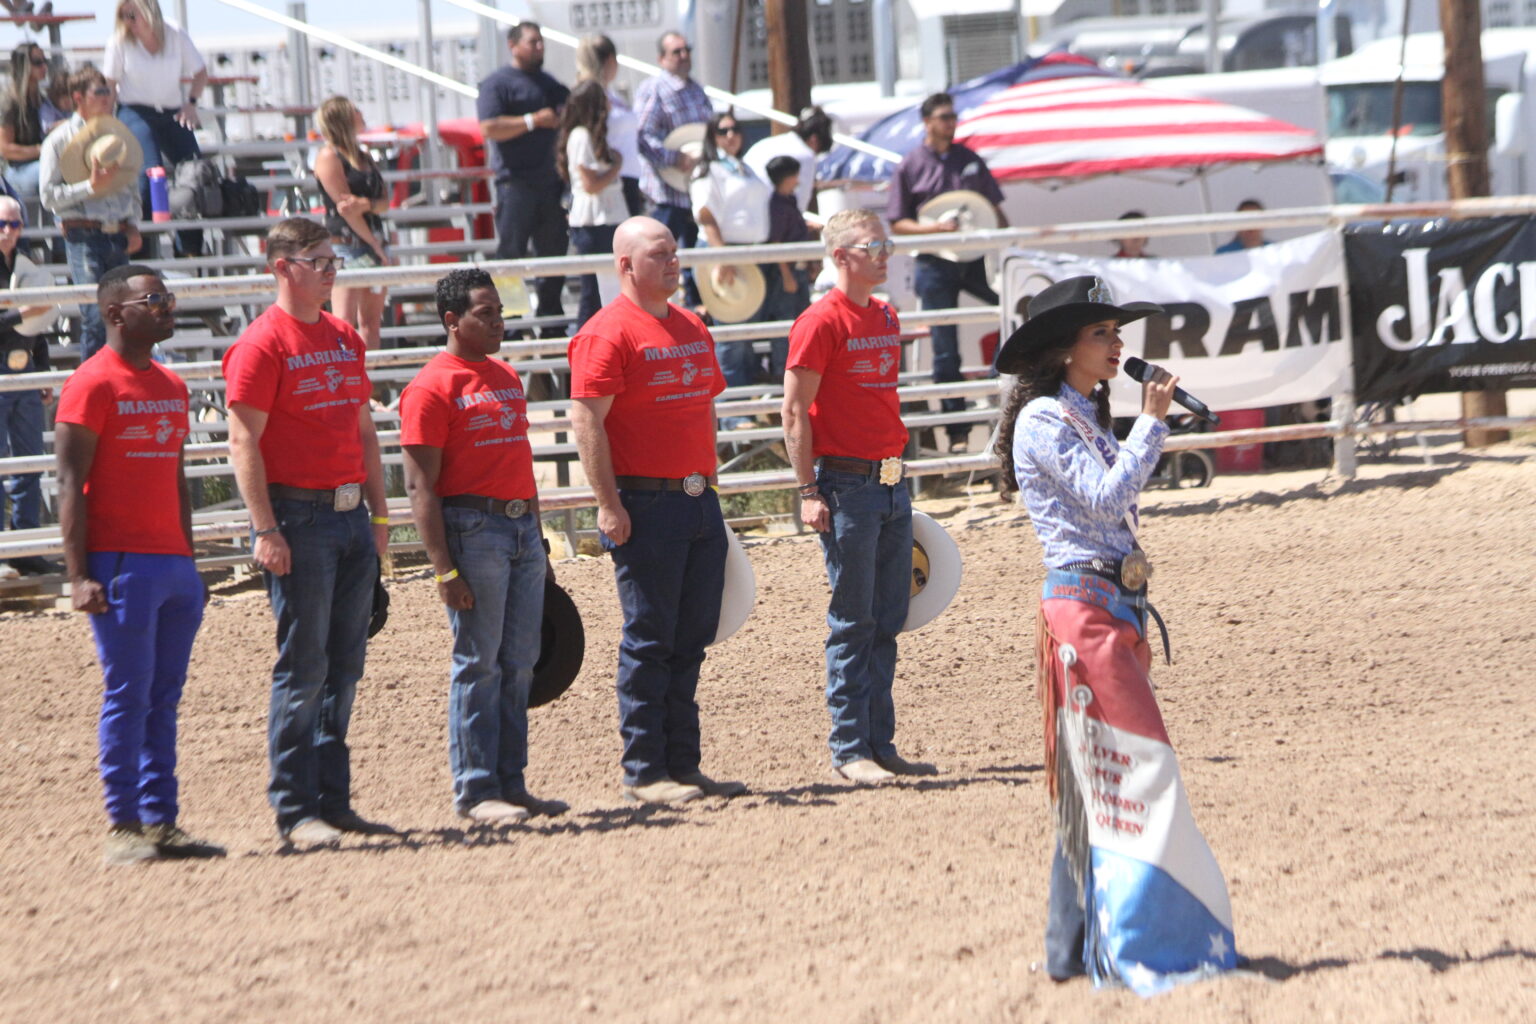 Save the Date for the 78th Annual Yuma Silver Spur Rodeo!